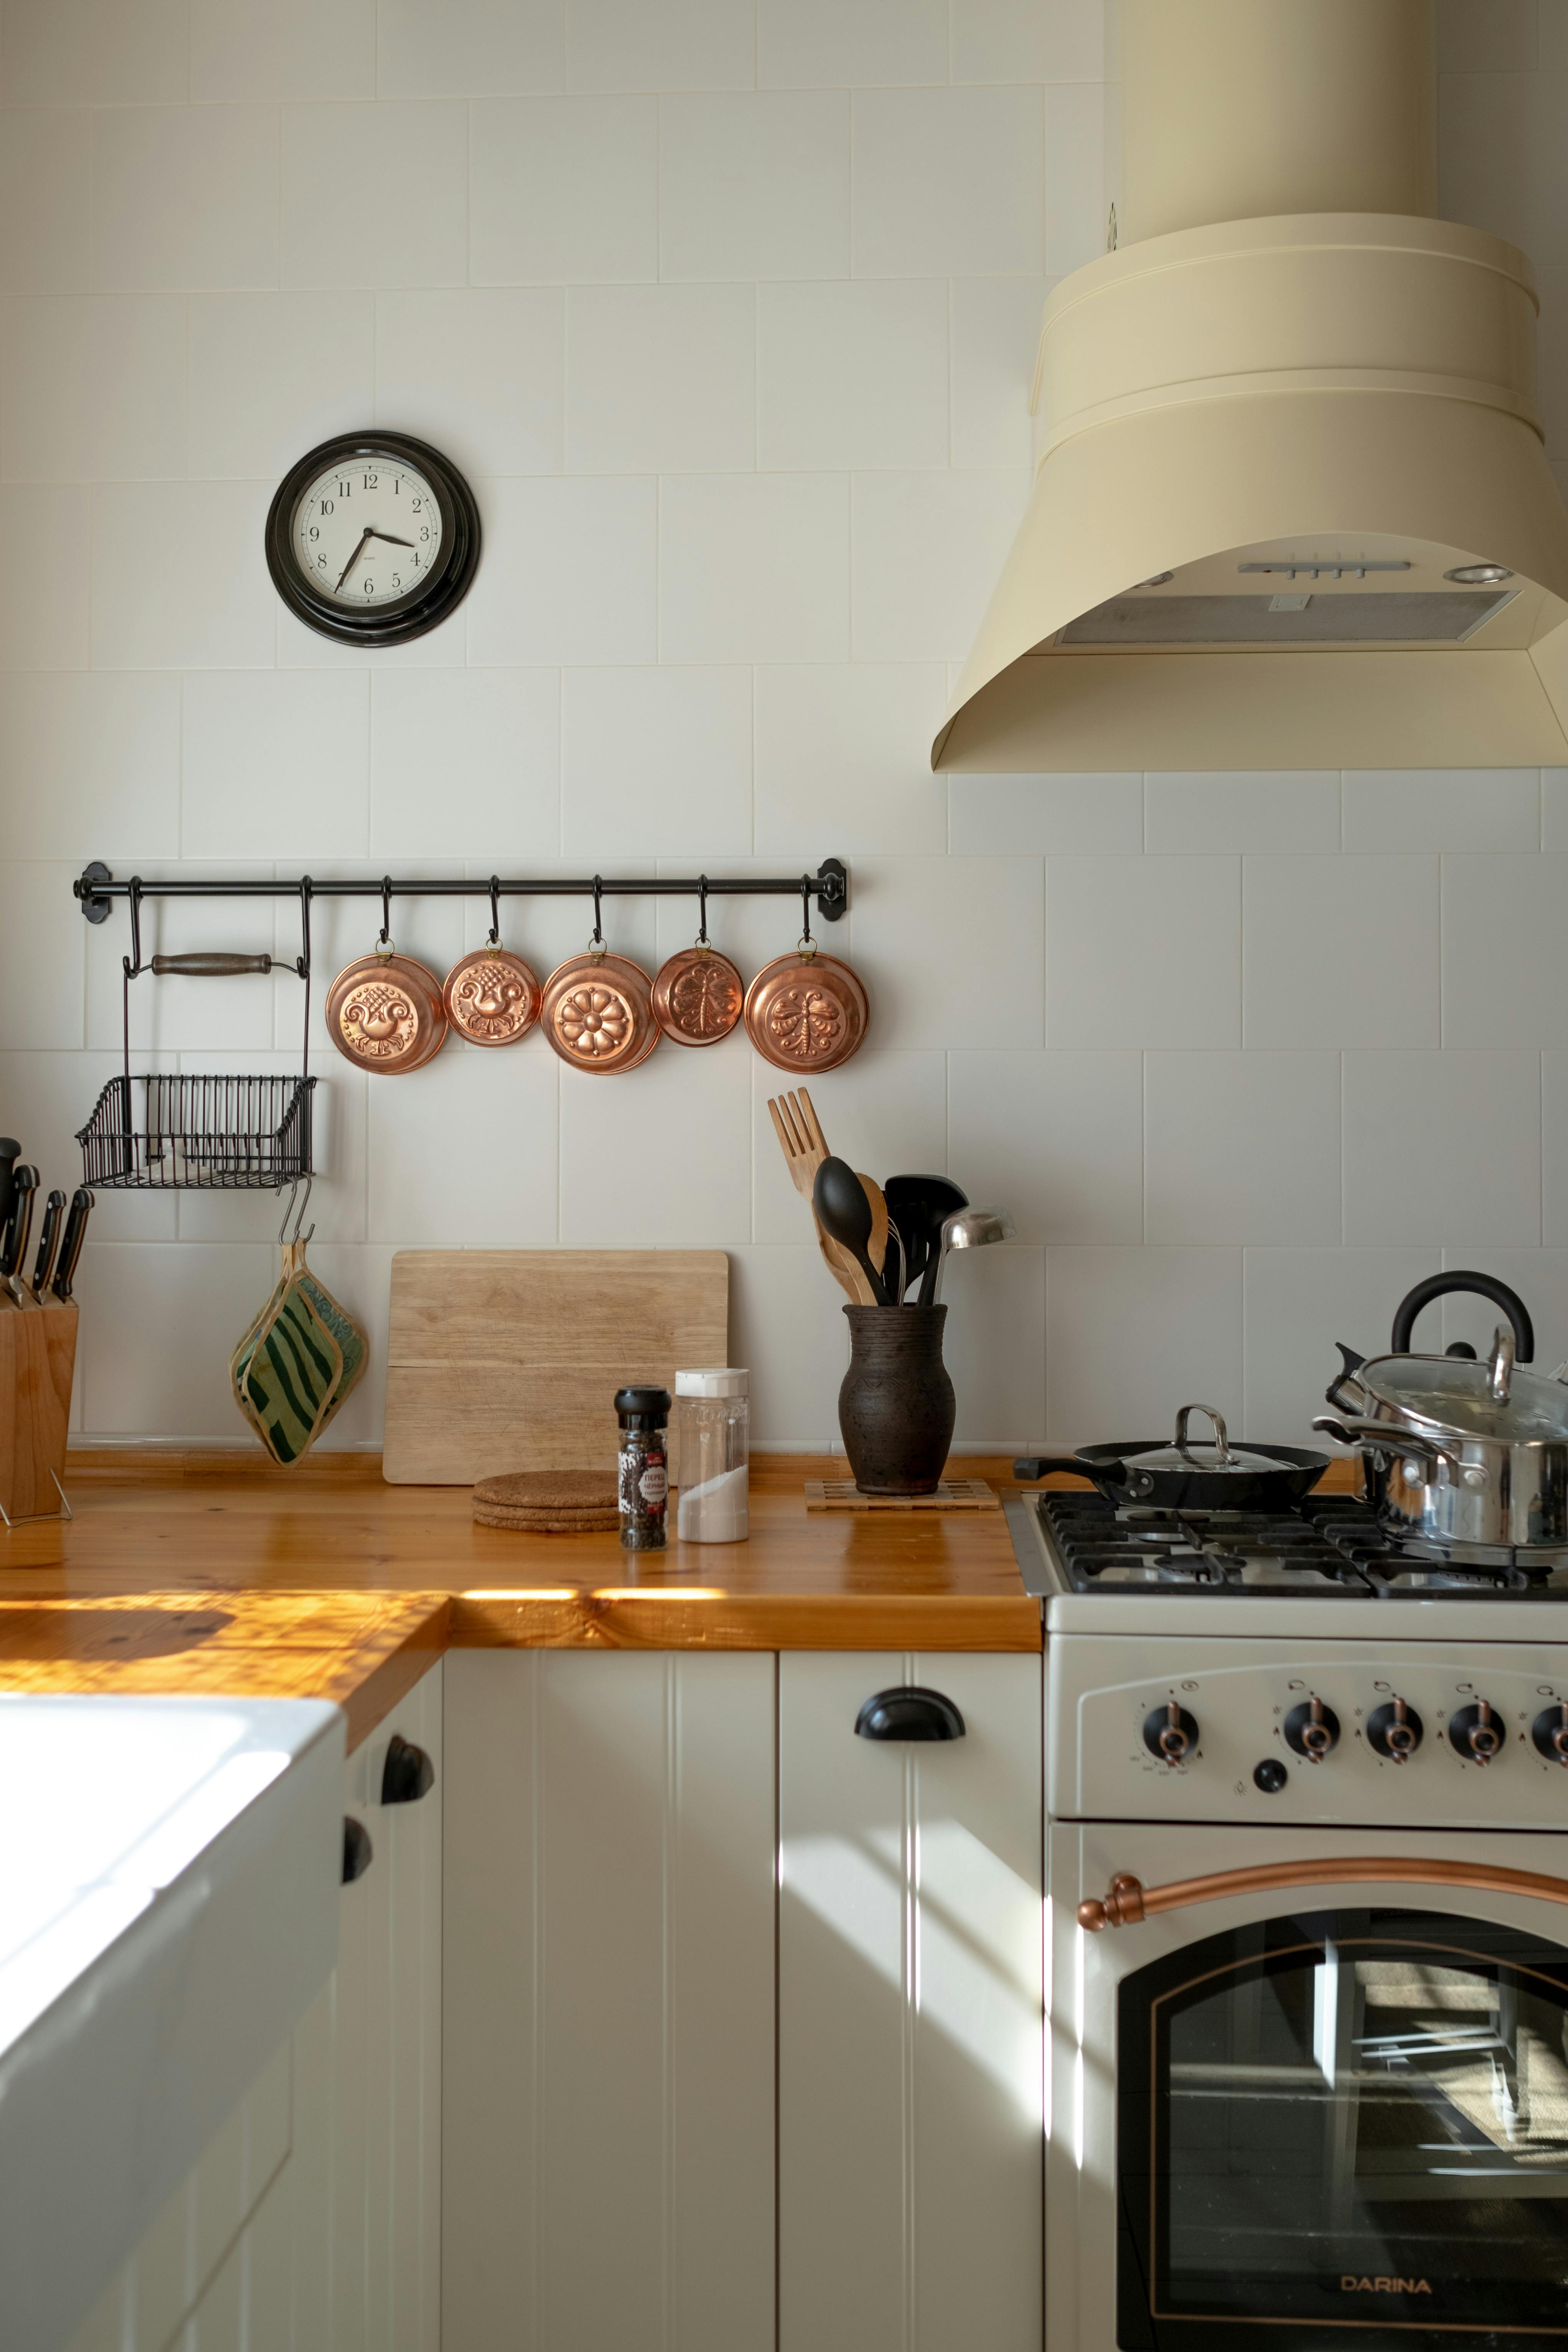 Kitchen Interior With Vintage Kitchenware Stock Photo, Picture and Royalty  Free Image. Image 47429586.